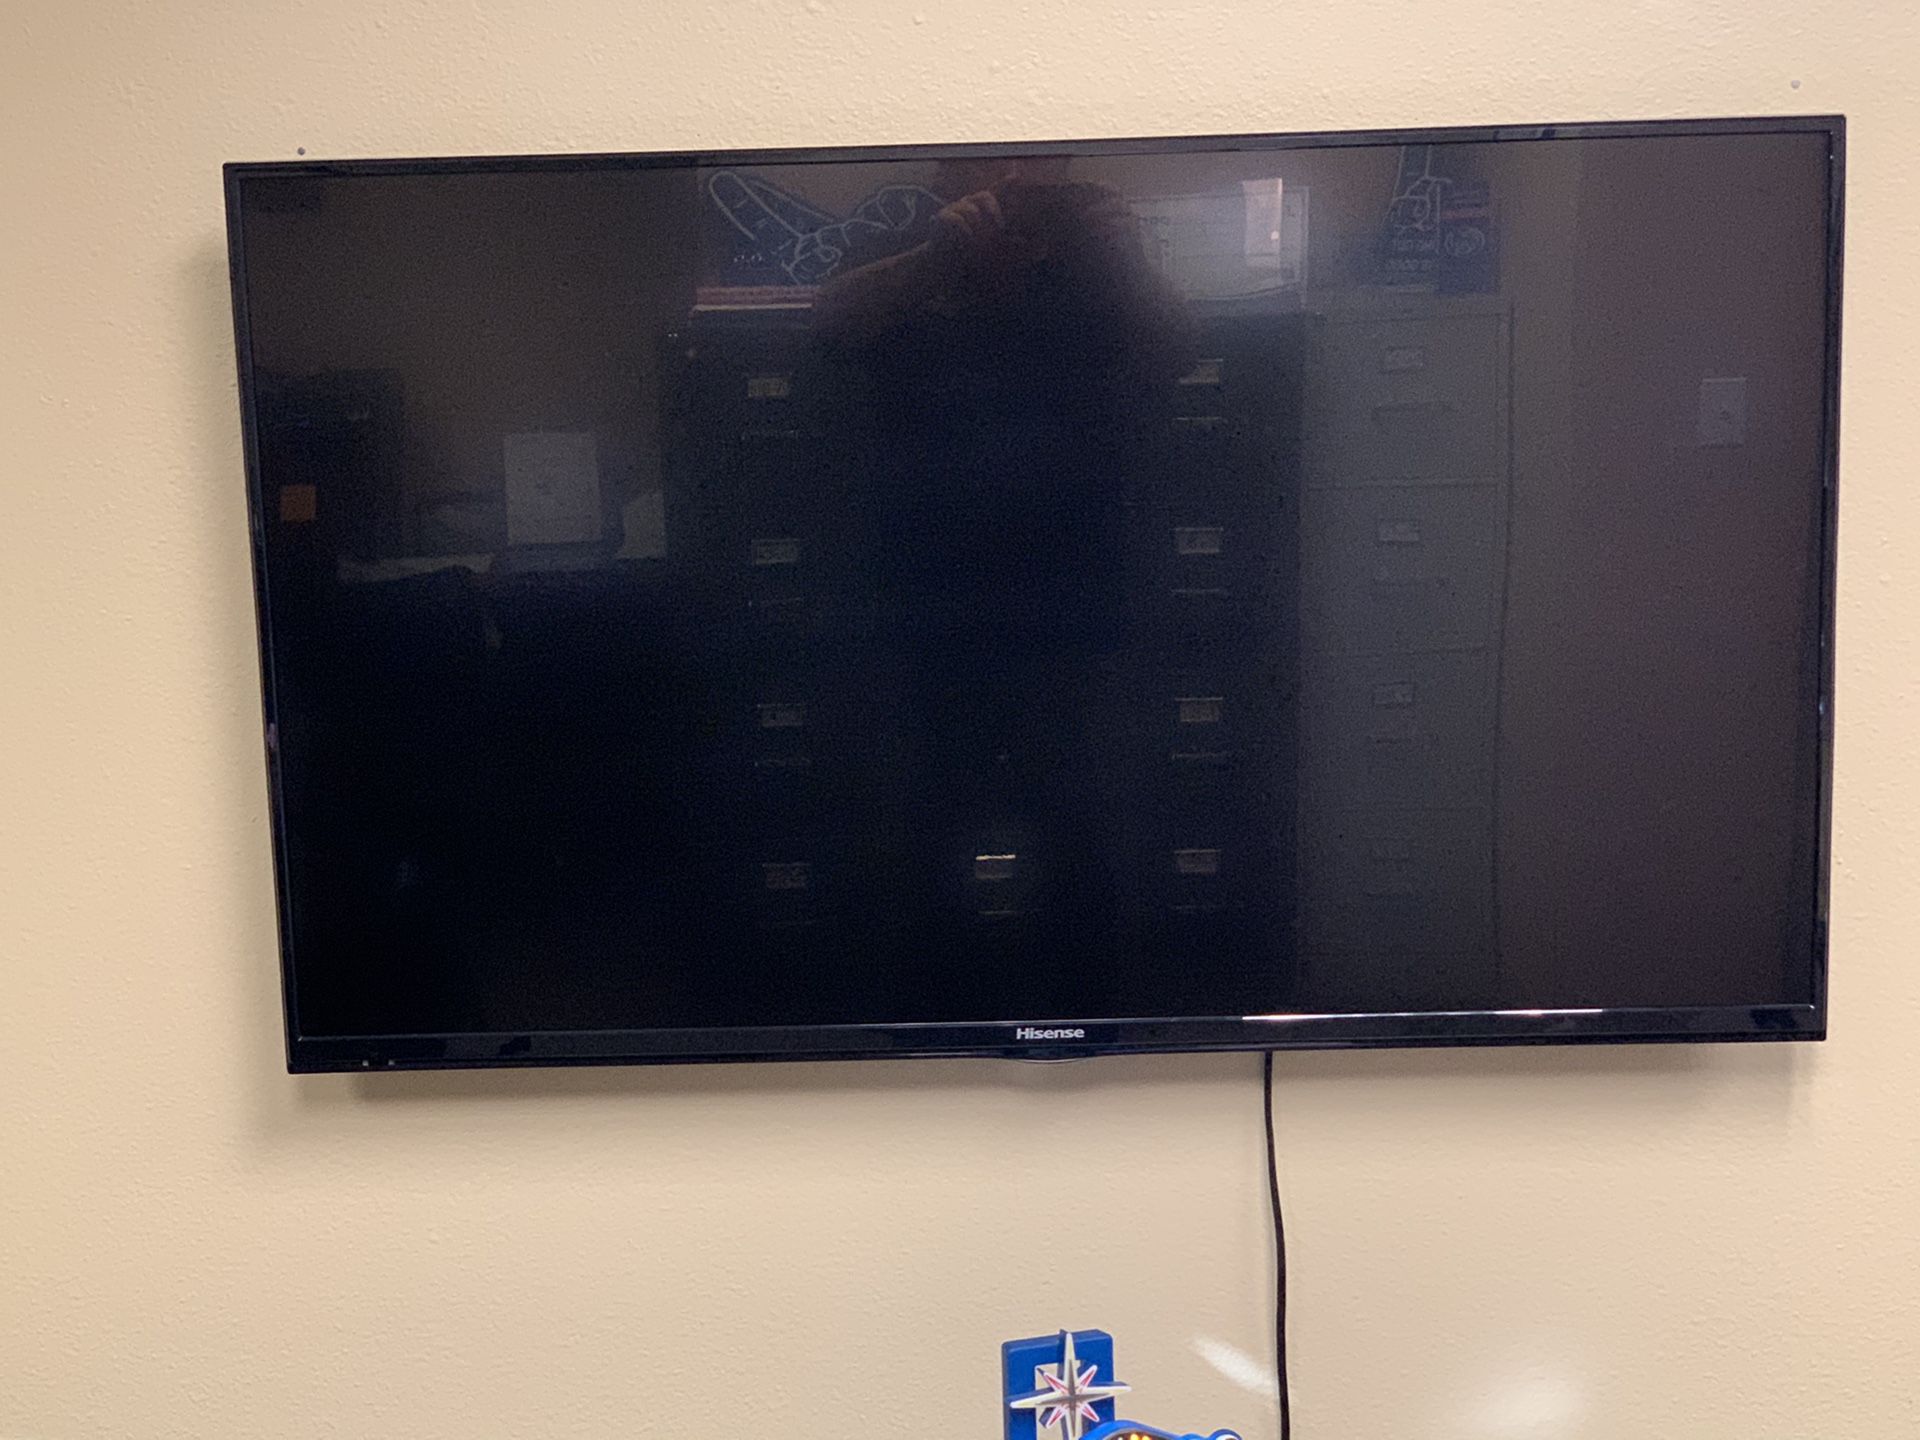 50 inch flat screen wall mounted TV. In office and almost never used. Asking $150. Mounting hardware included. You will have to pick up at busine